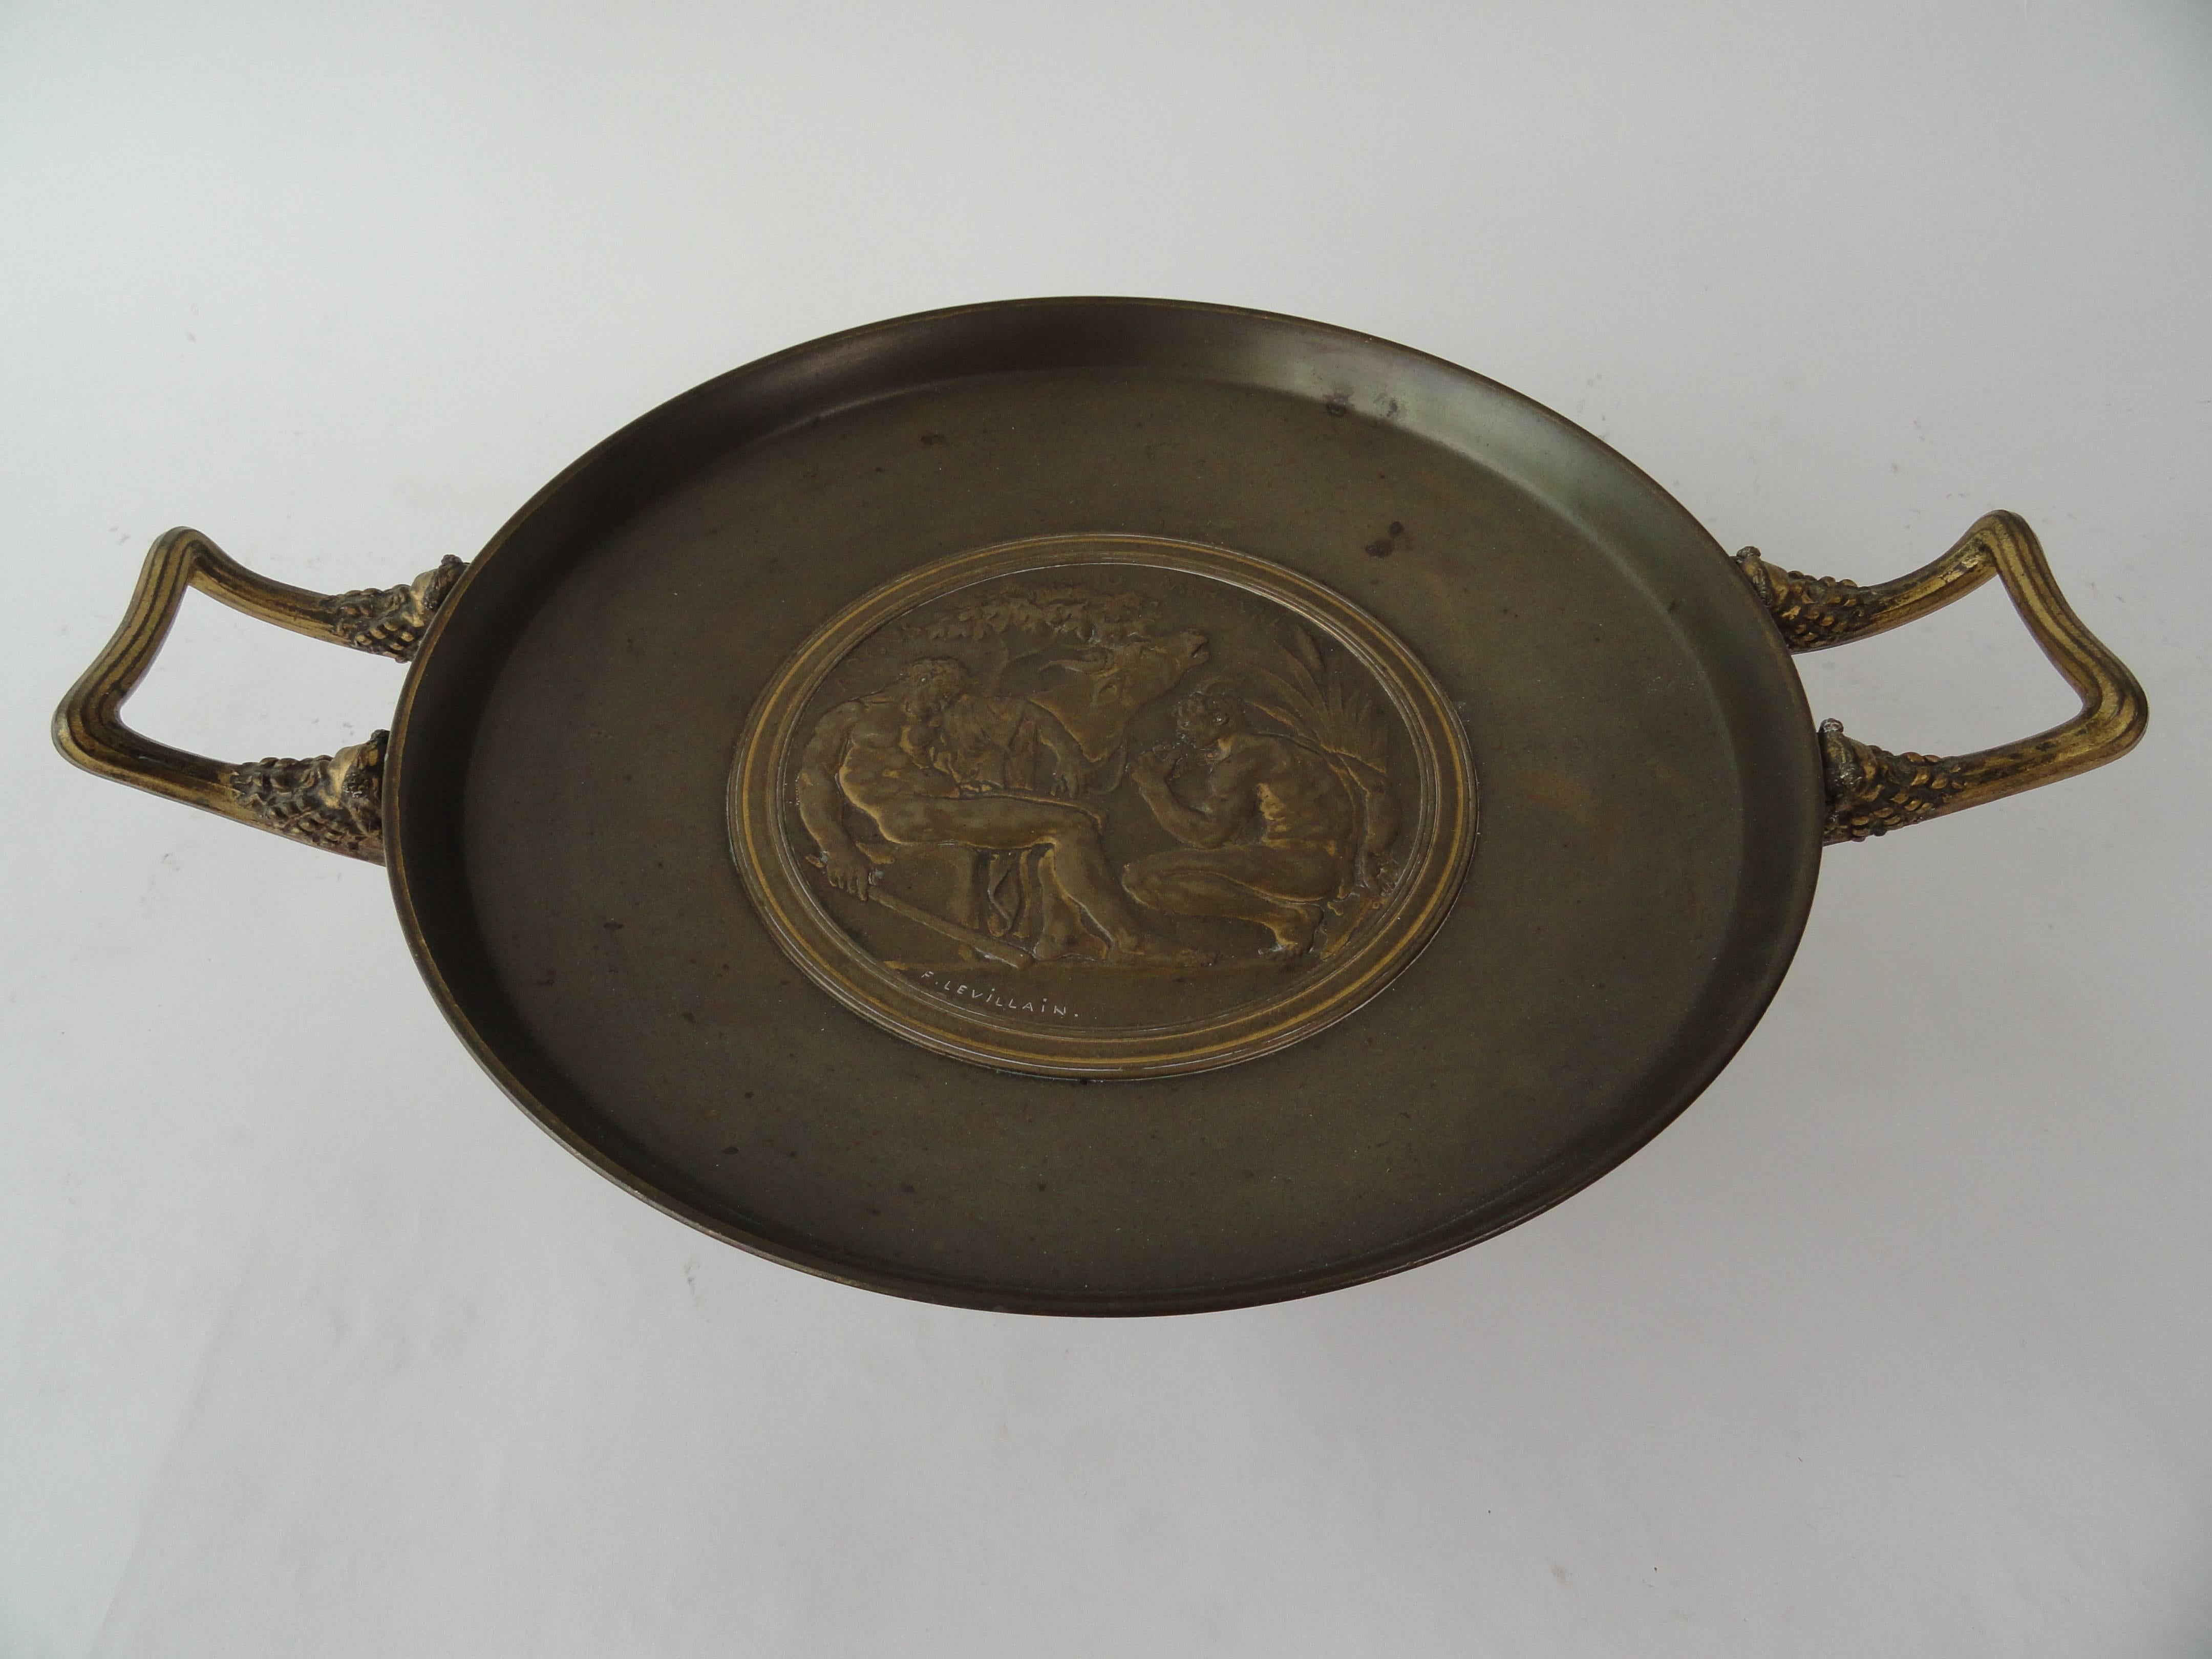 Ferdinand Levillain (1837-1905) & Ferdinand Barbedienne (1810-1892), bronze tazza, 19th century, French.
Designed by Levillain and signed in the casting, marked F. Barbedienne, on underside of tazza. Large, round centerpiece, in the center with a